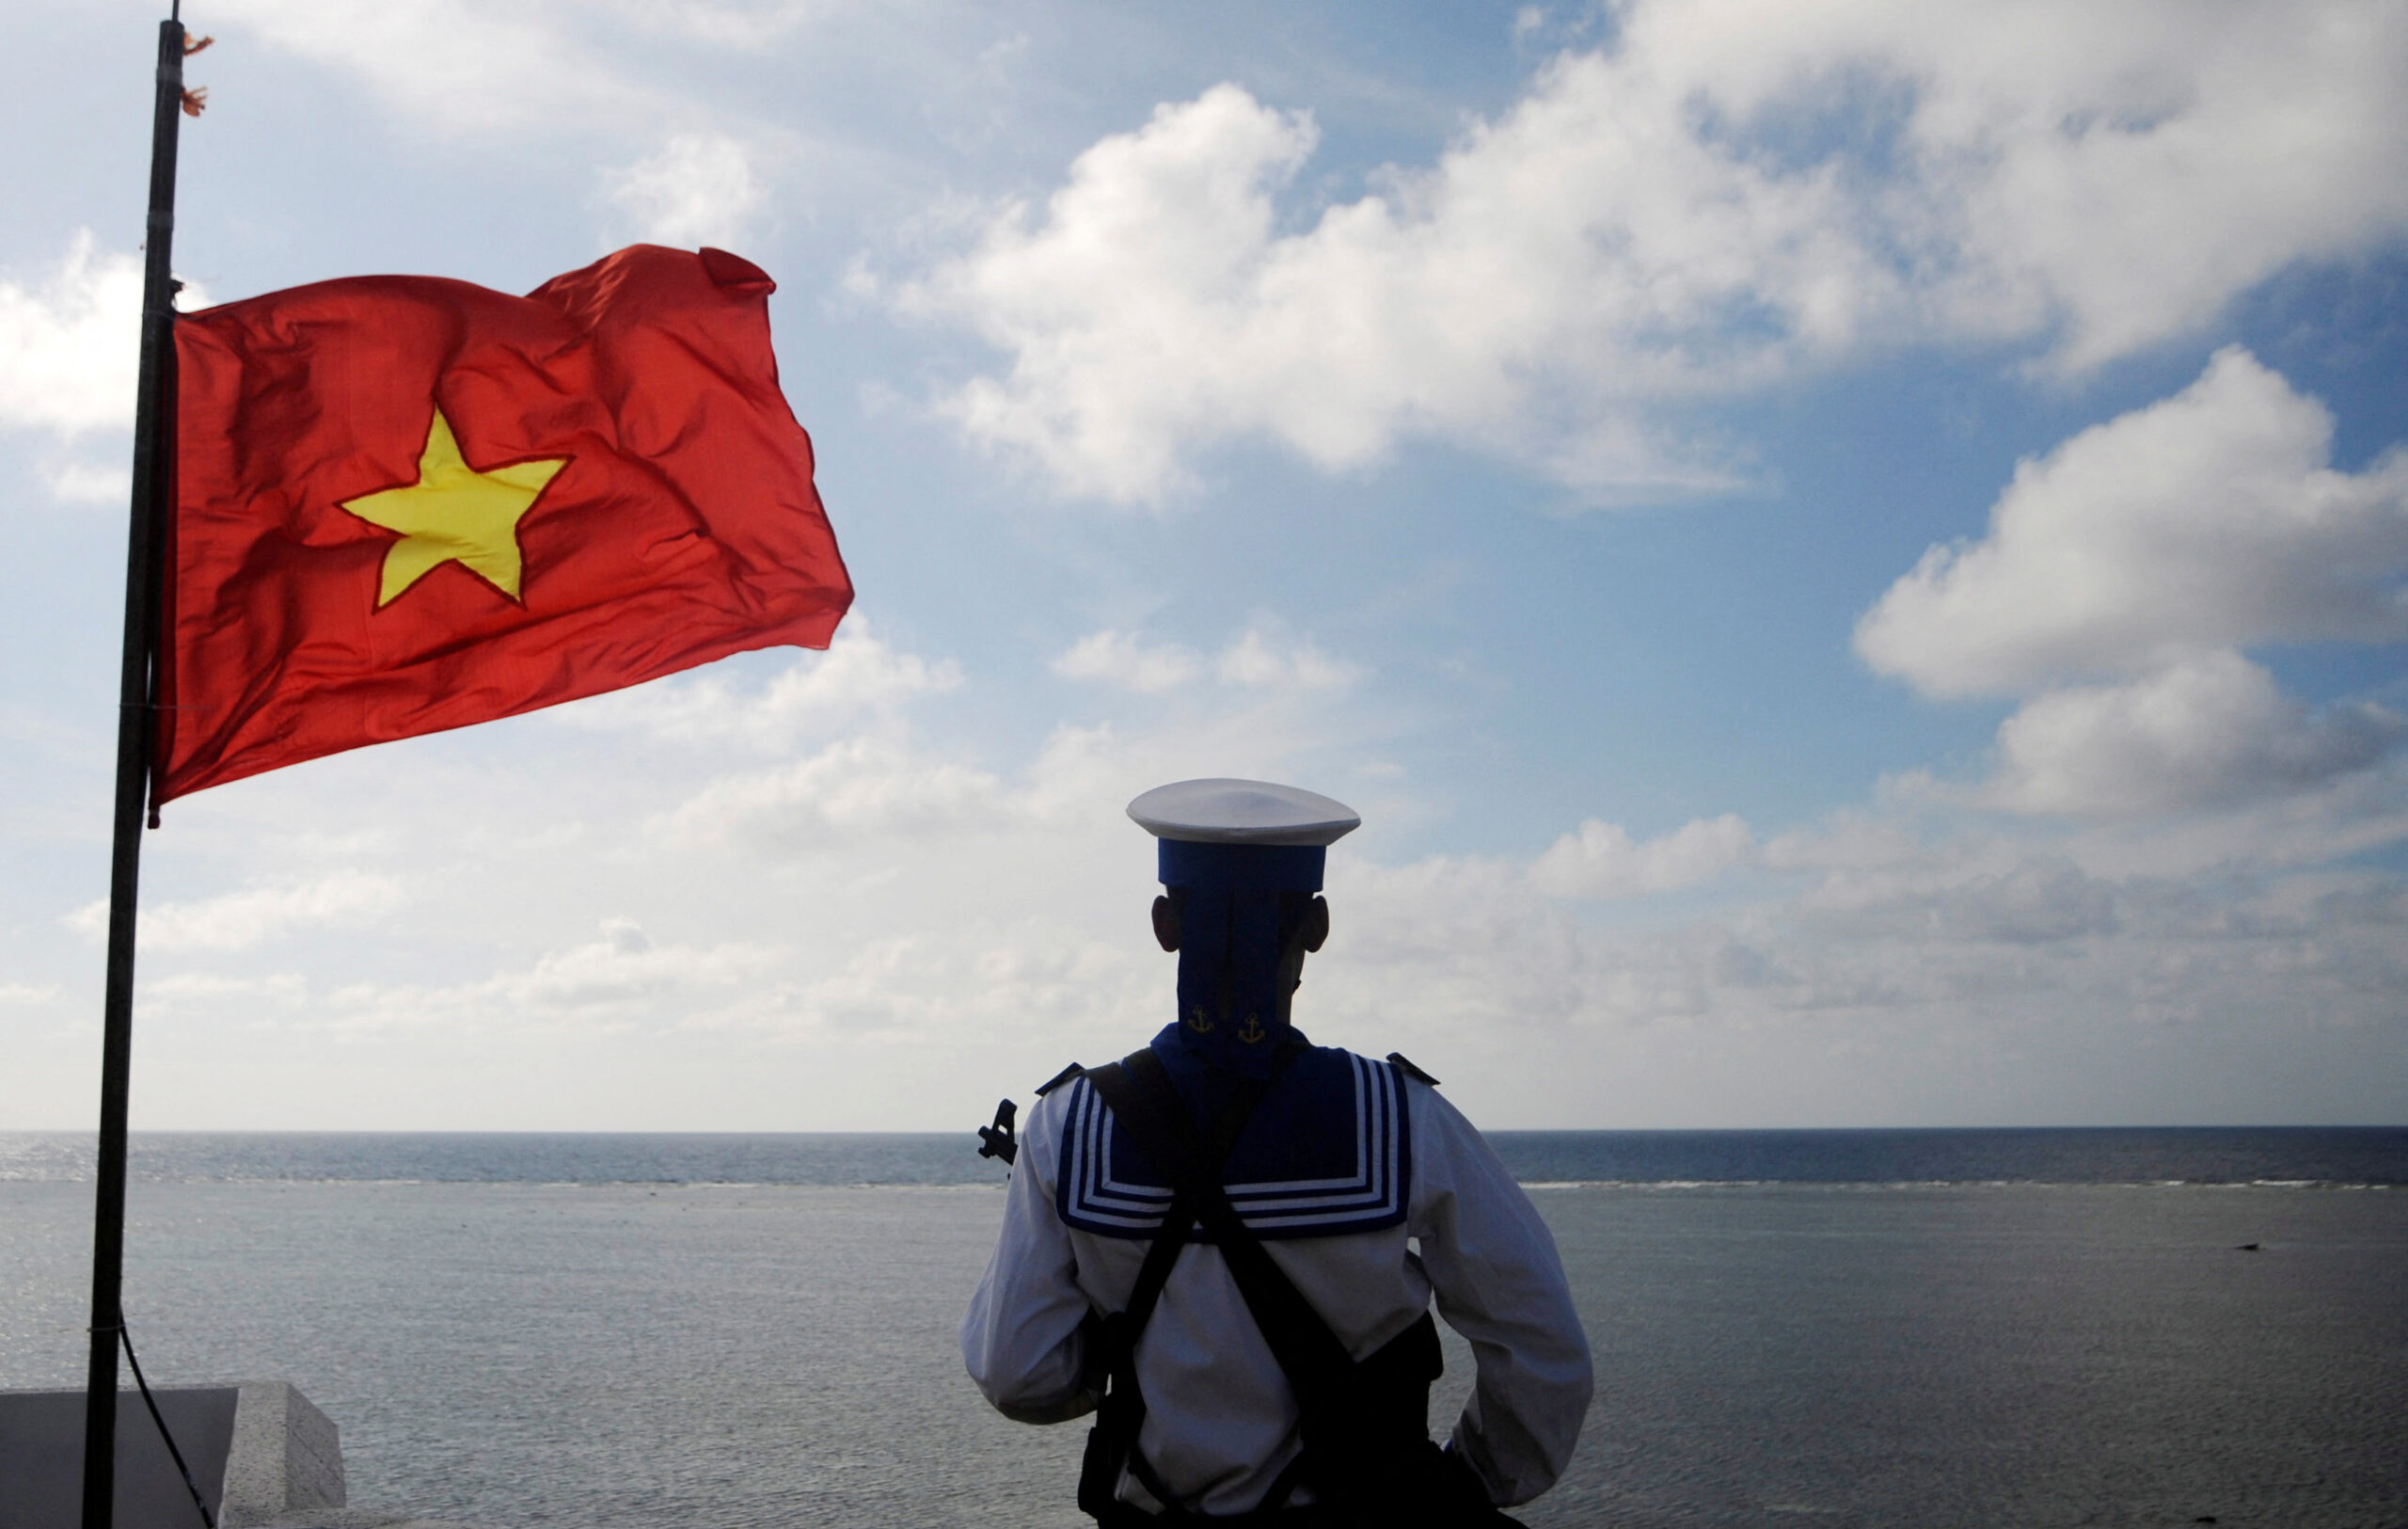 The Philippines and Vietnam signed a memorandum of understanding (MOU) on incident prevention in the South China Sea, said the Palace on Tuesday. 